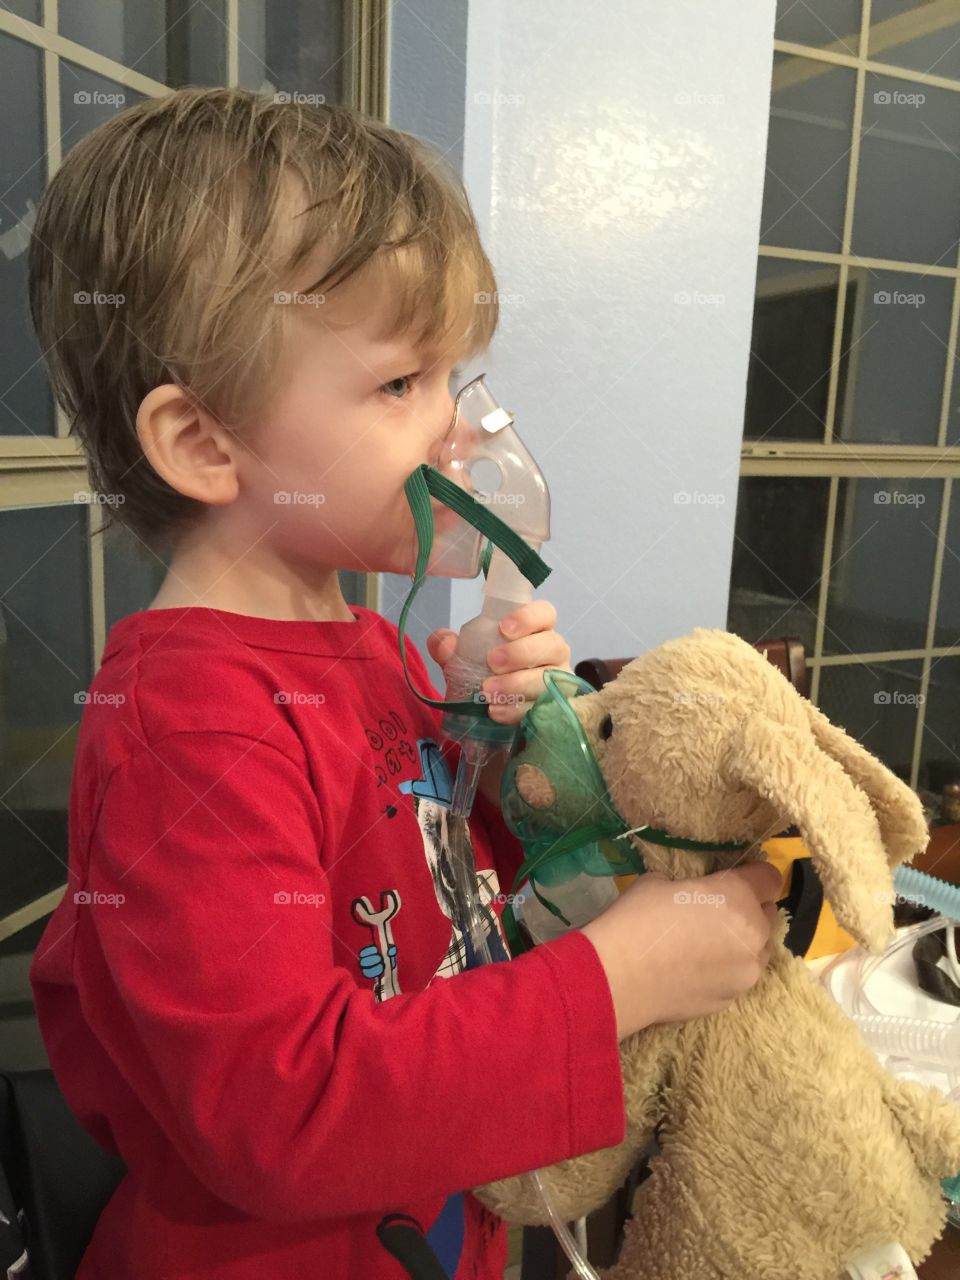 Breathing treatment . Peanut allergy leads to breathing treatment for boy and his dog.